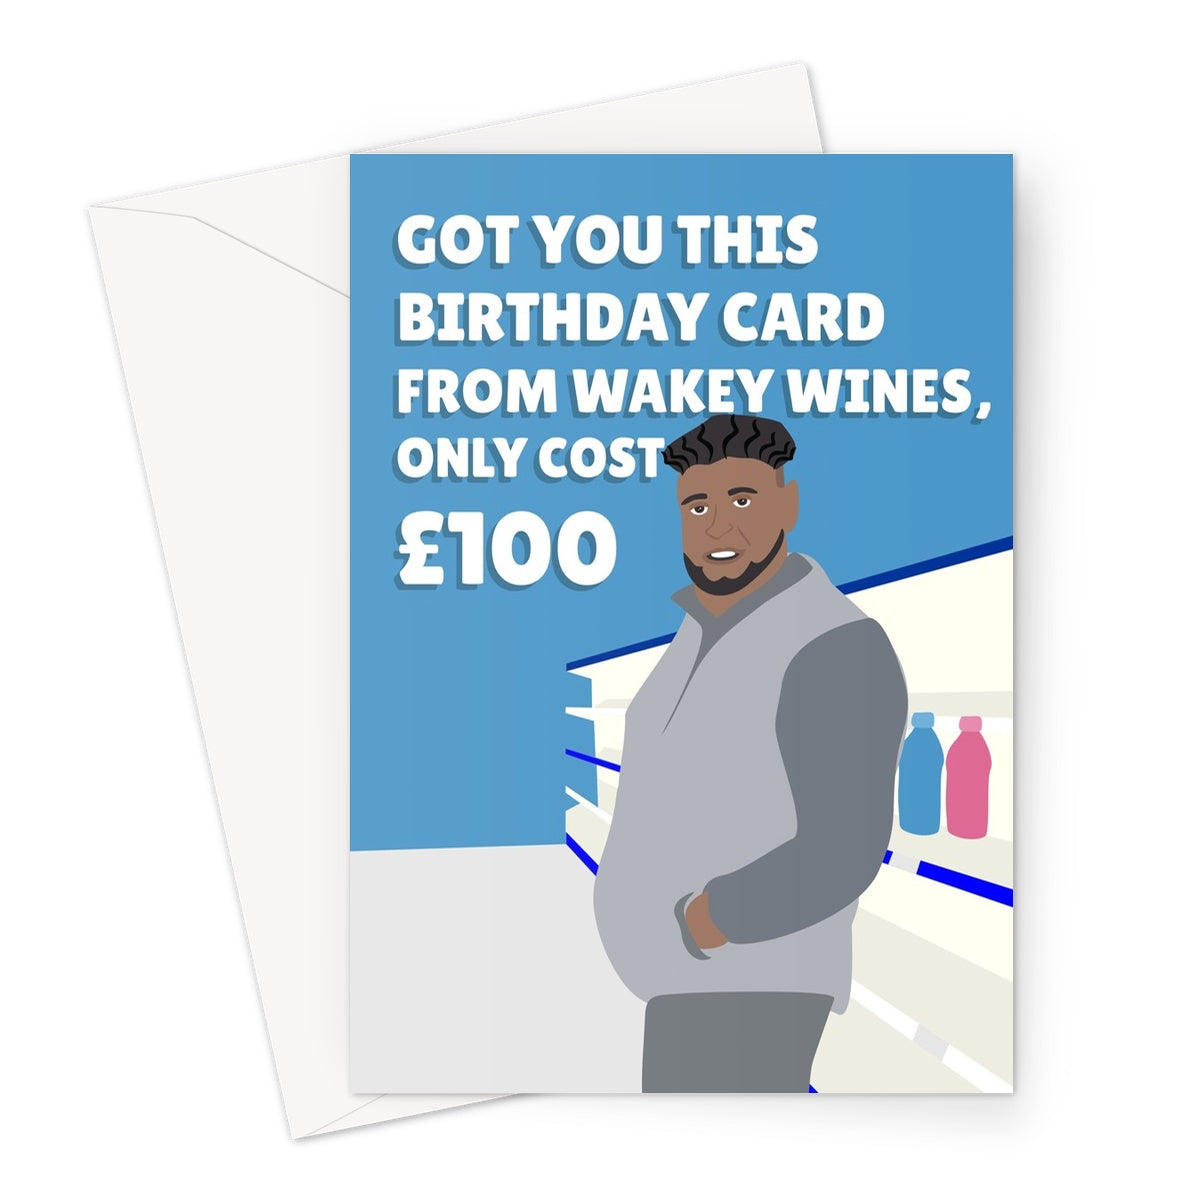 Got You This Birthday Card From Wakey Wines Only Cost £100 Funny Social Media Trend Abdul Come Closer Drink Greeting Card